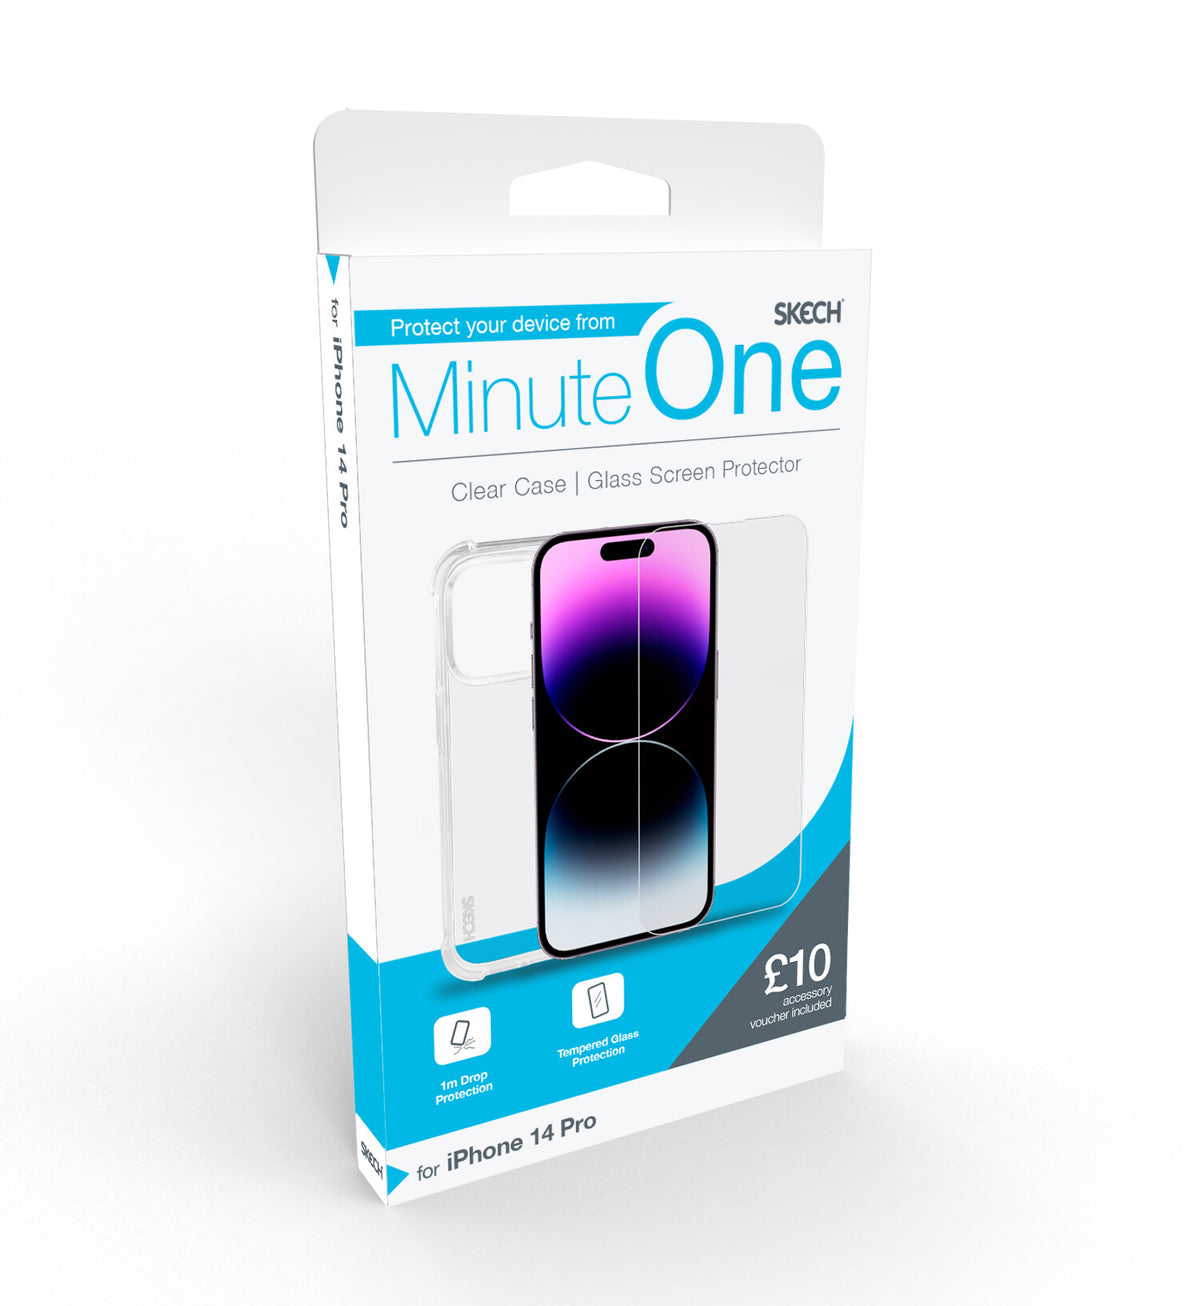 Skech Minute One Bundle for iPhone 14 Pro